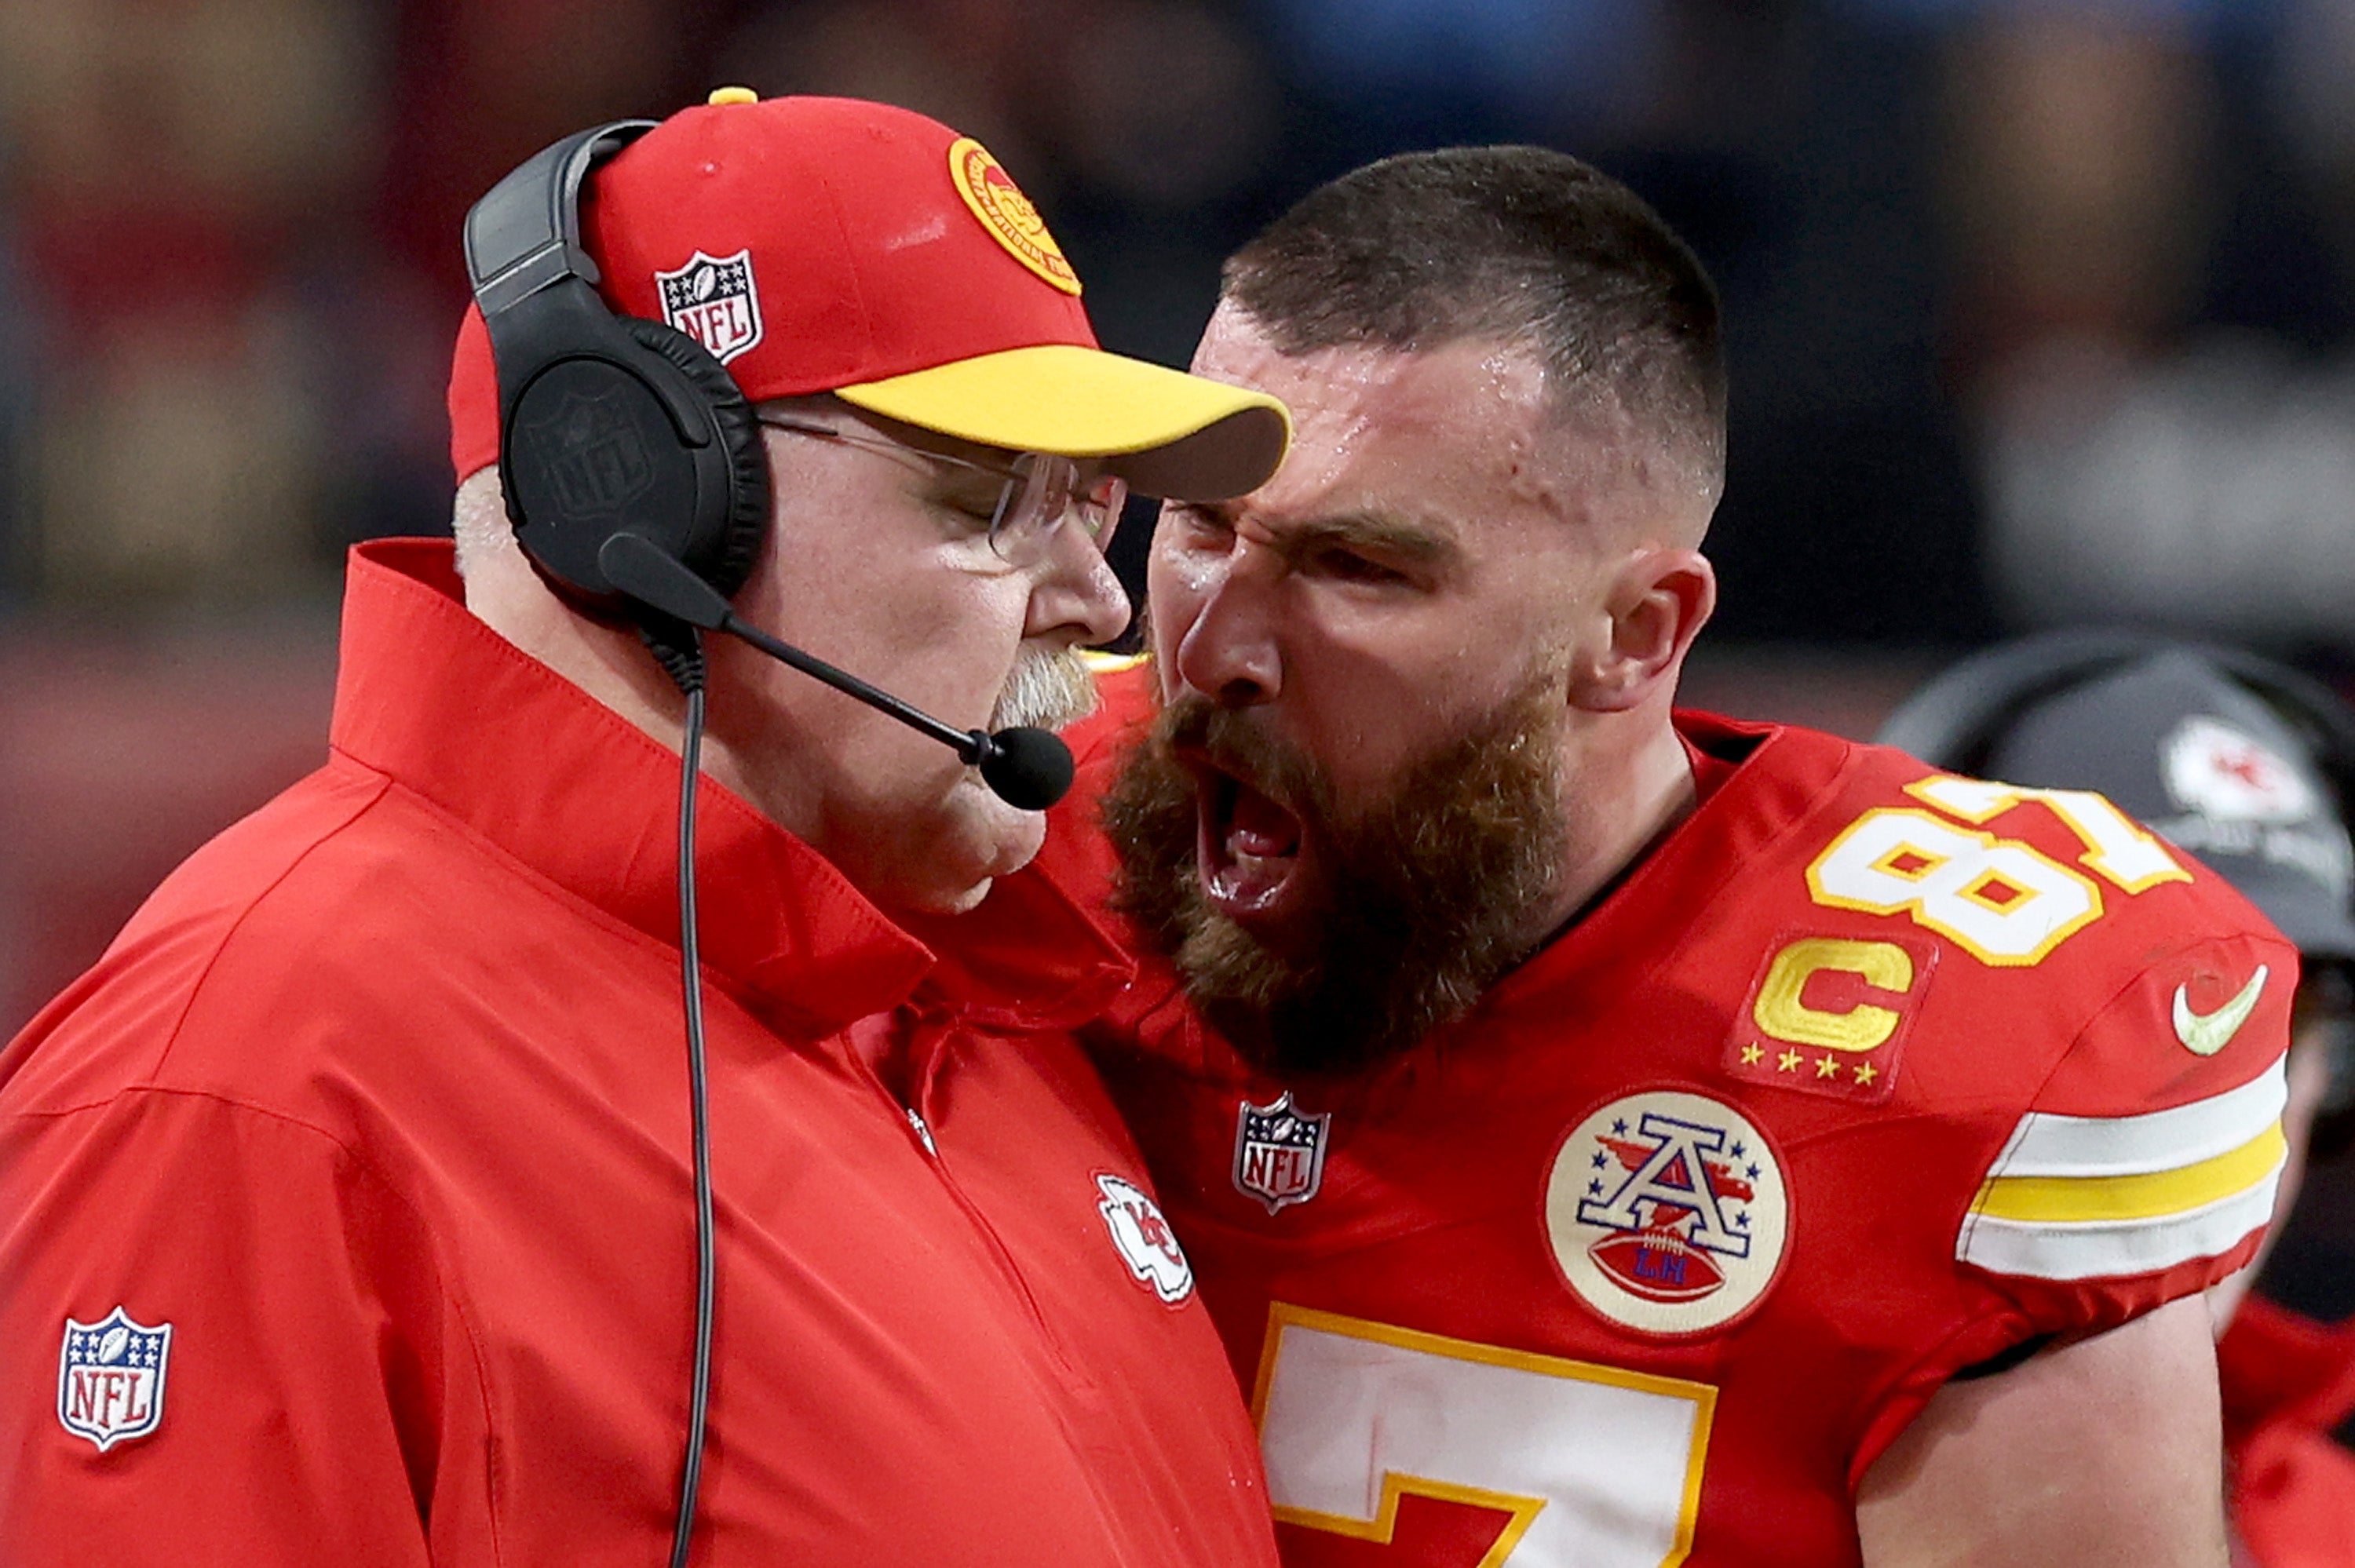 Kelce yells into the face of his coach, Andy Reid